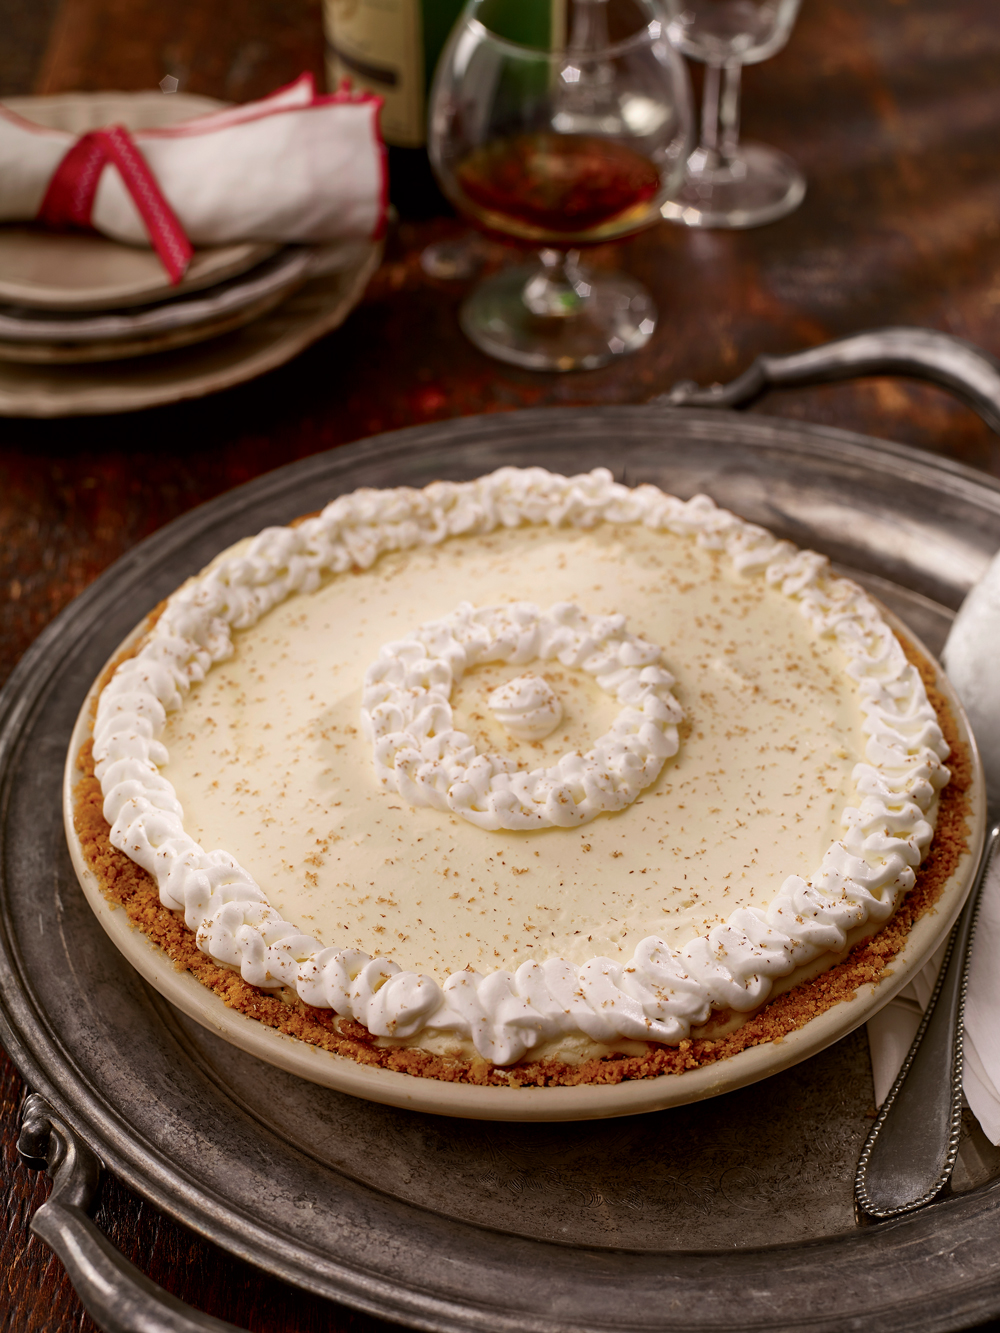 12 Classic Pie Recipes from the Yankee Archives